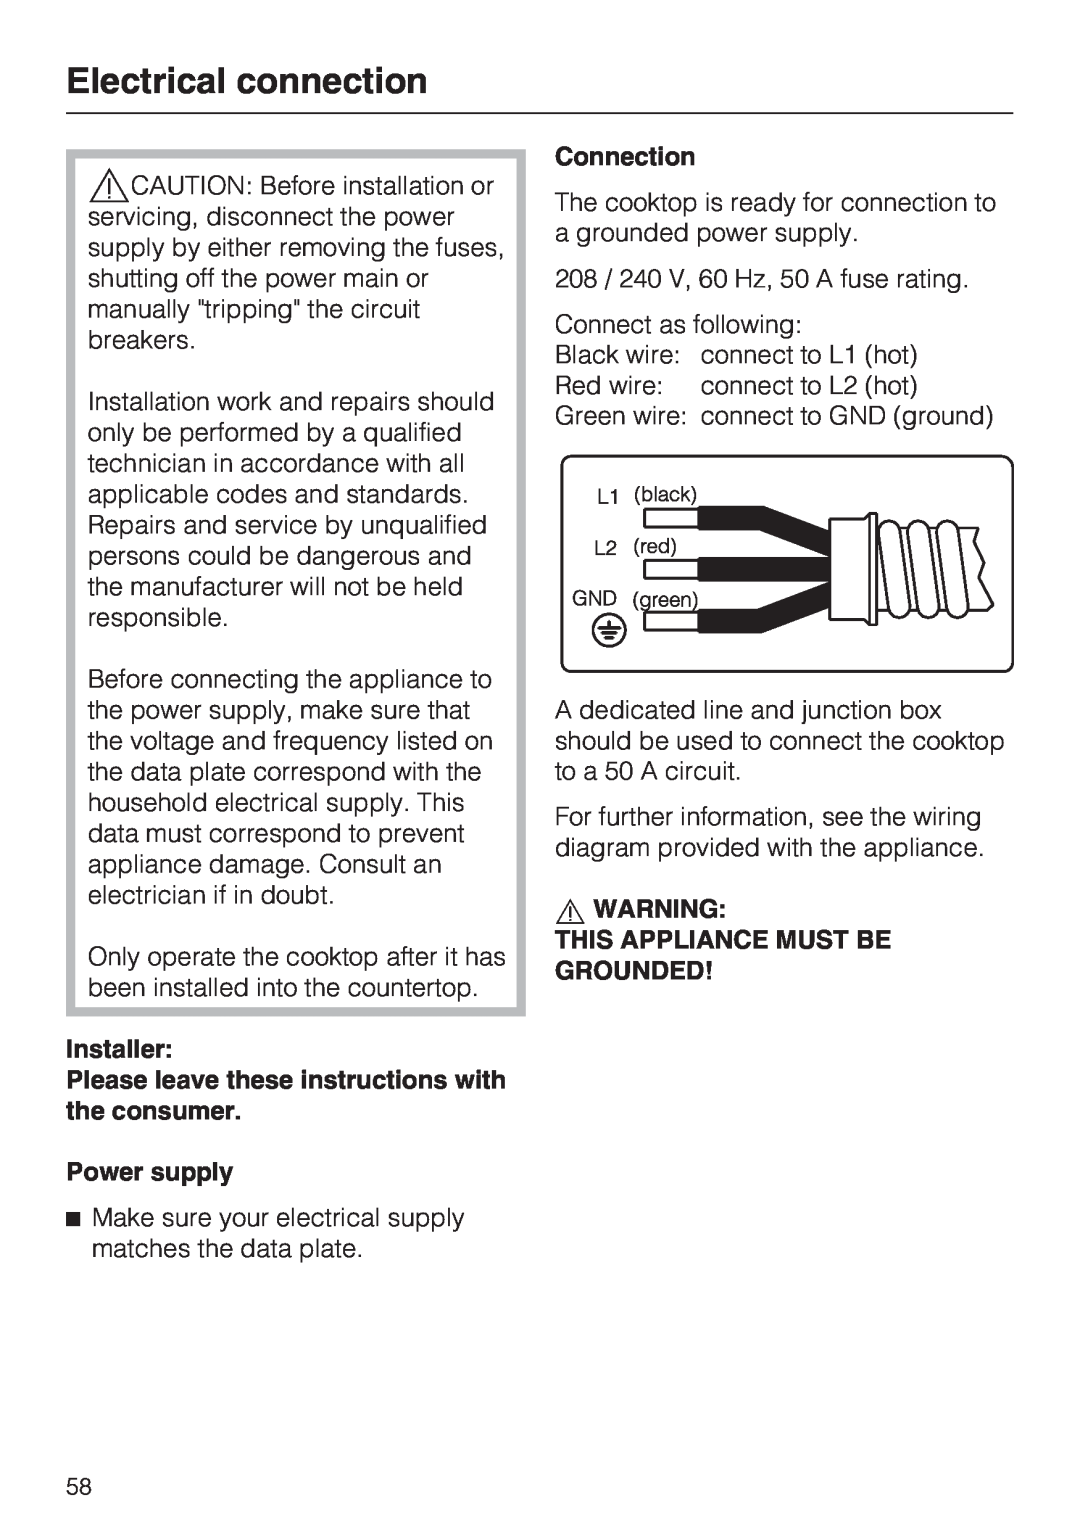 Miele KM 5993, KM 5987 Electrical connection, Installer, Please leave these instructions with the consumer, Power supply 